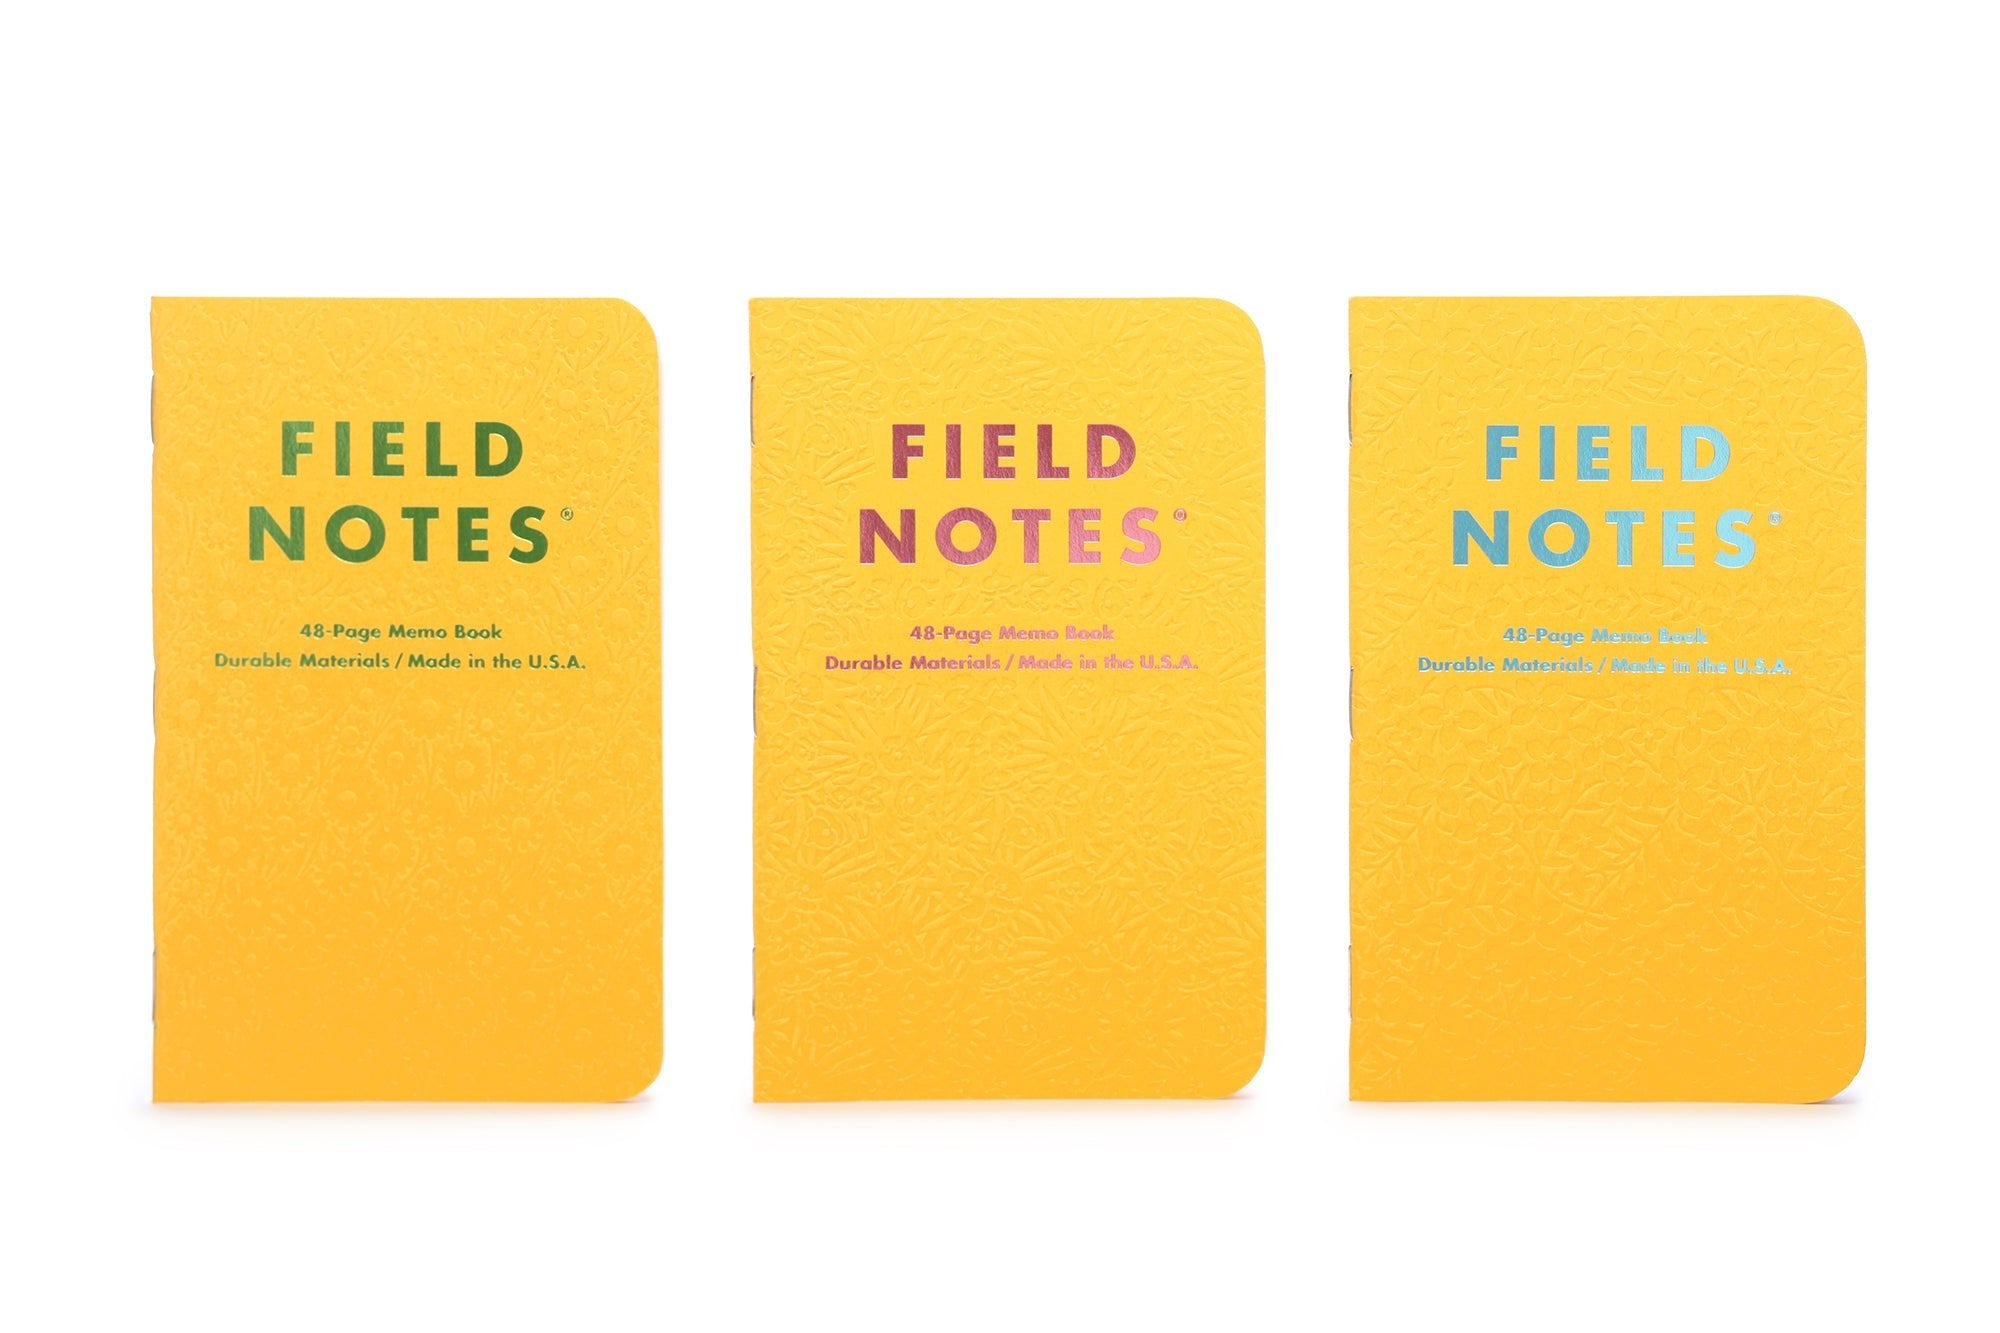 Field Notes: Signs of Spring